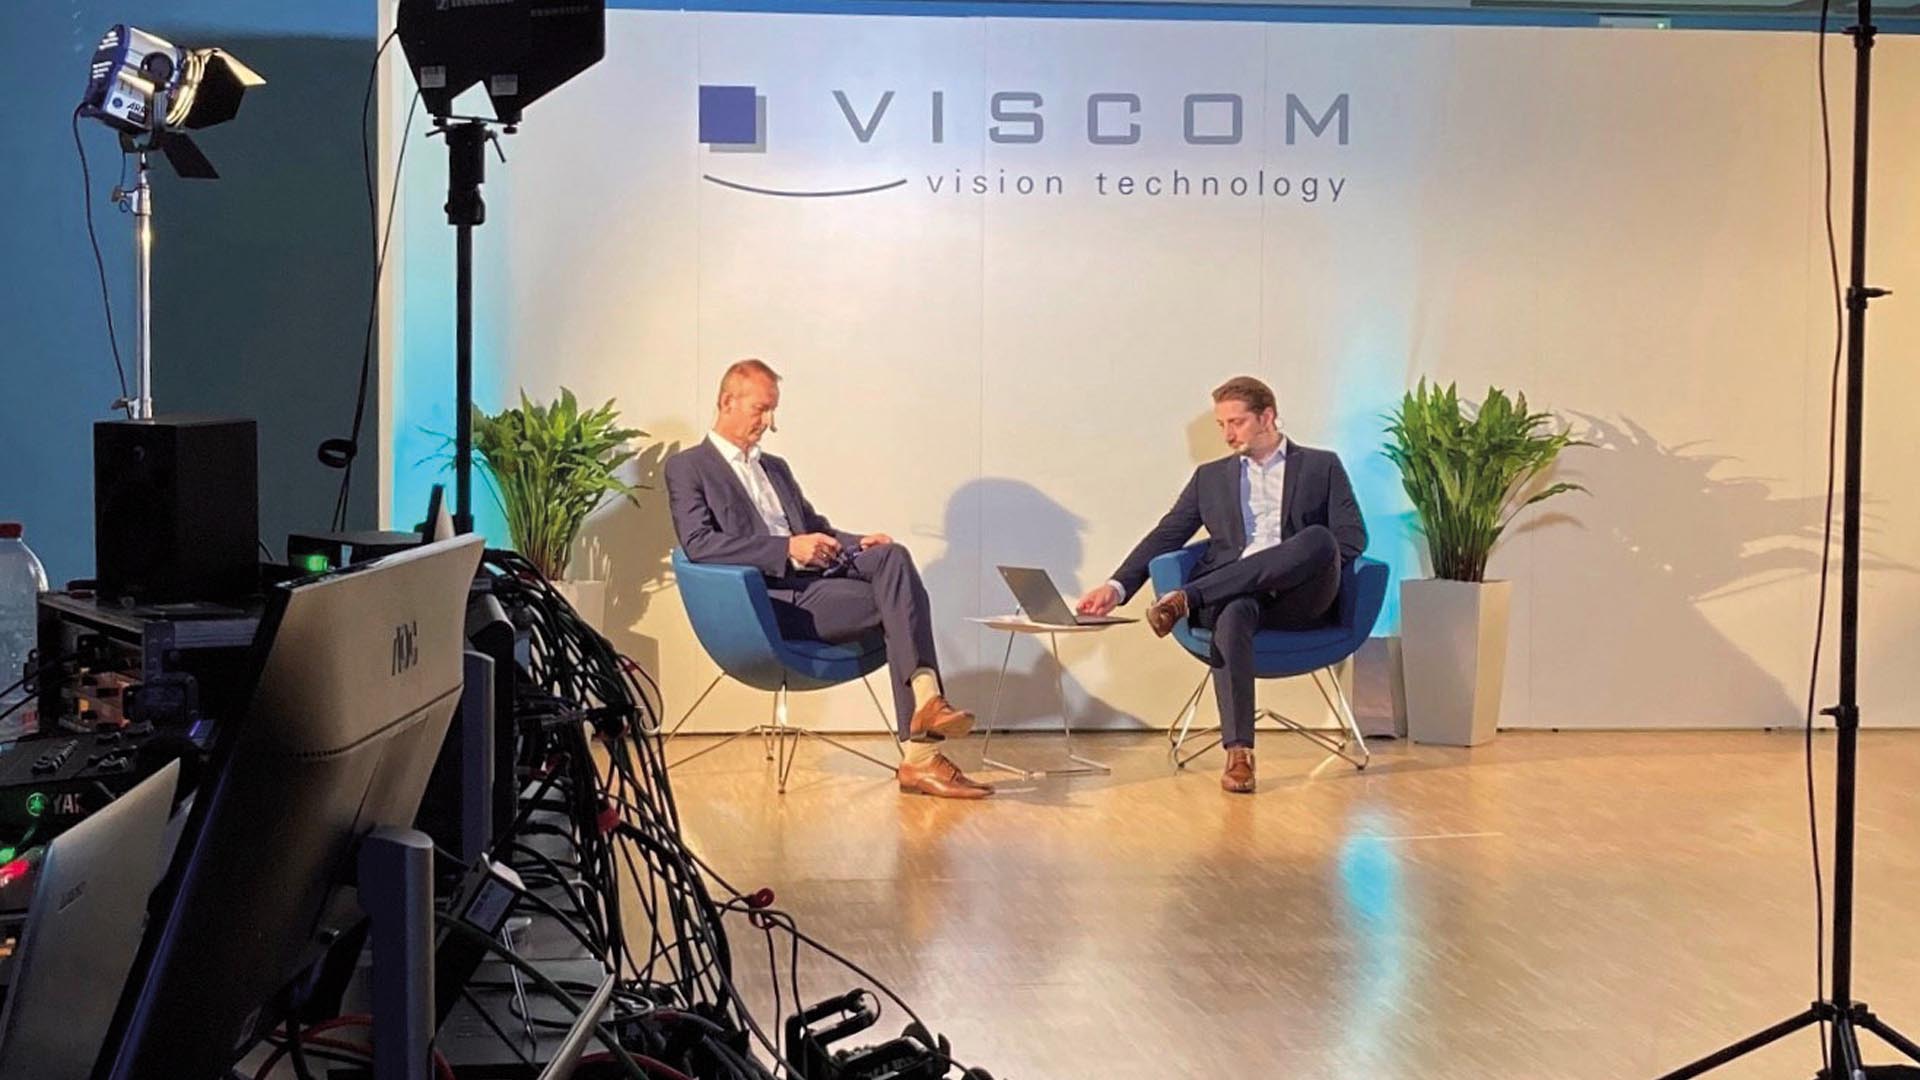 Viscom traditionally took the main moderation into its own hands: Overall Sales Manager Torsten Pelzer and Head of Key Account Management Dr. Nicolas Thiemeyer shortly before an interim summary